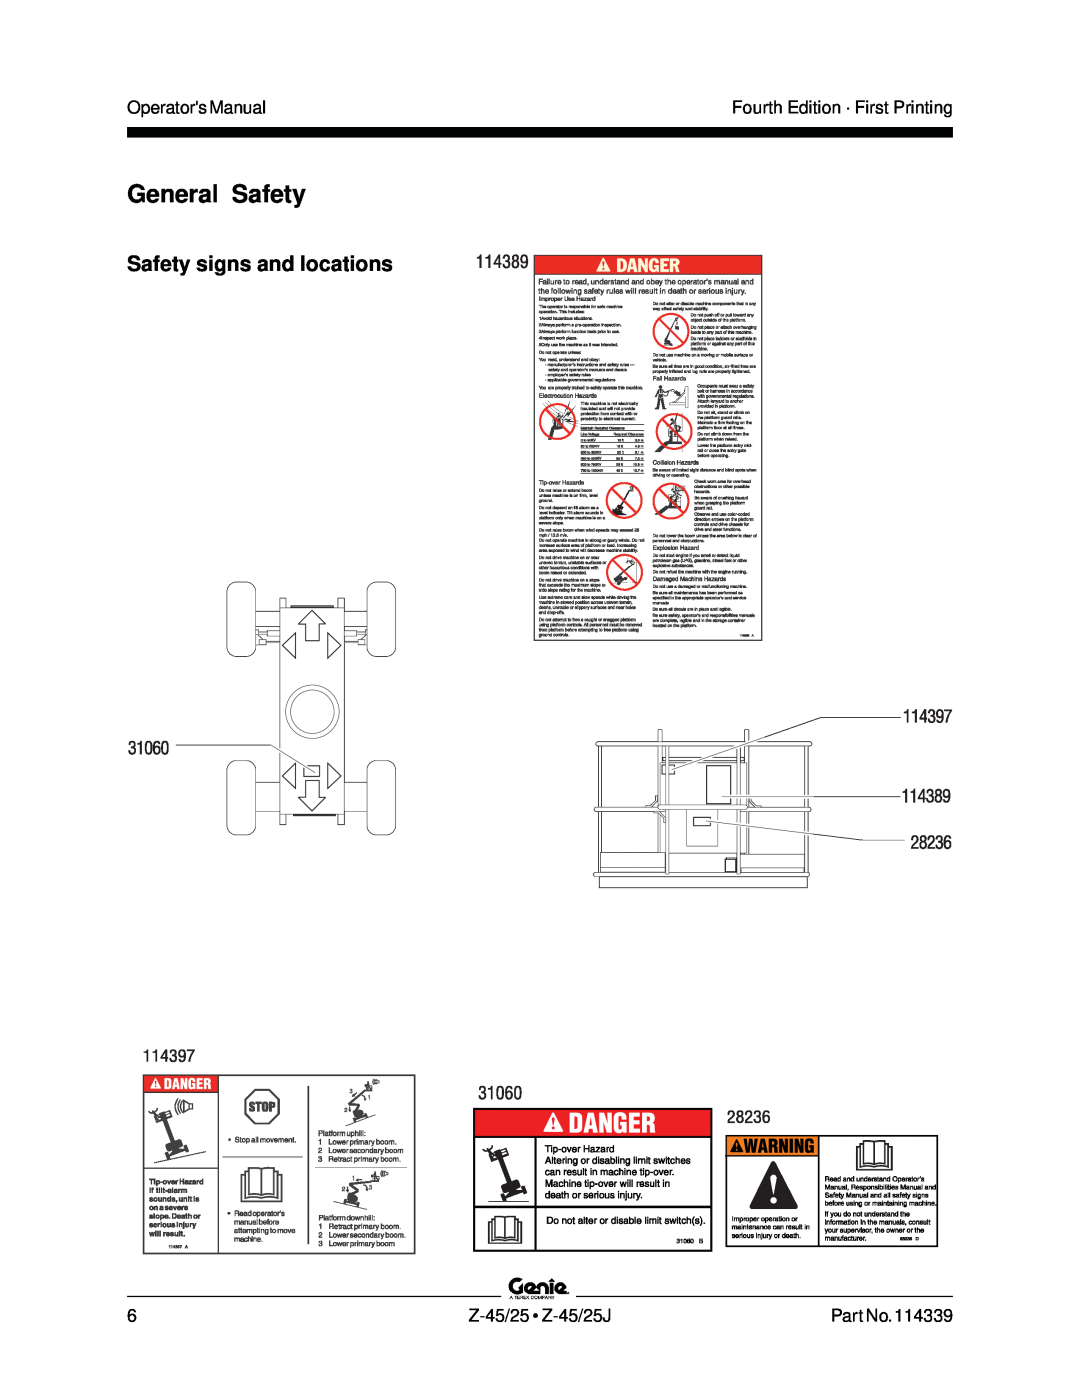 Genie Z-45, Z-25 manual General Safety, Safety signs and locations, Operators Manual, Fourth Edition · First Printing 